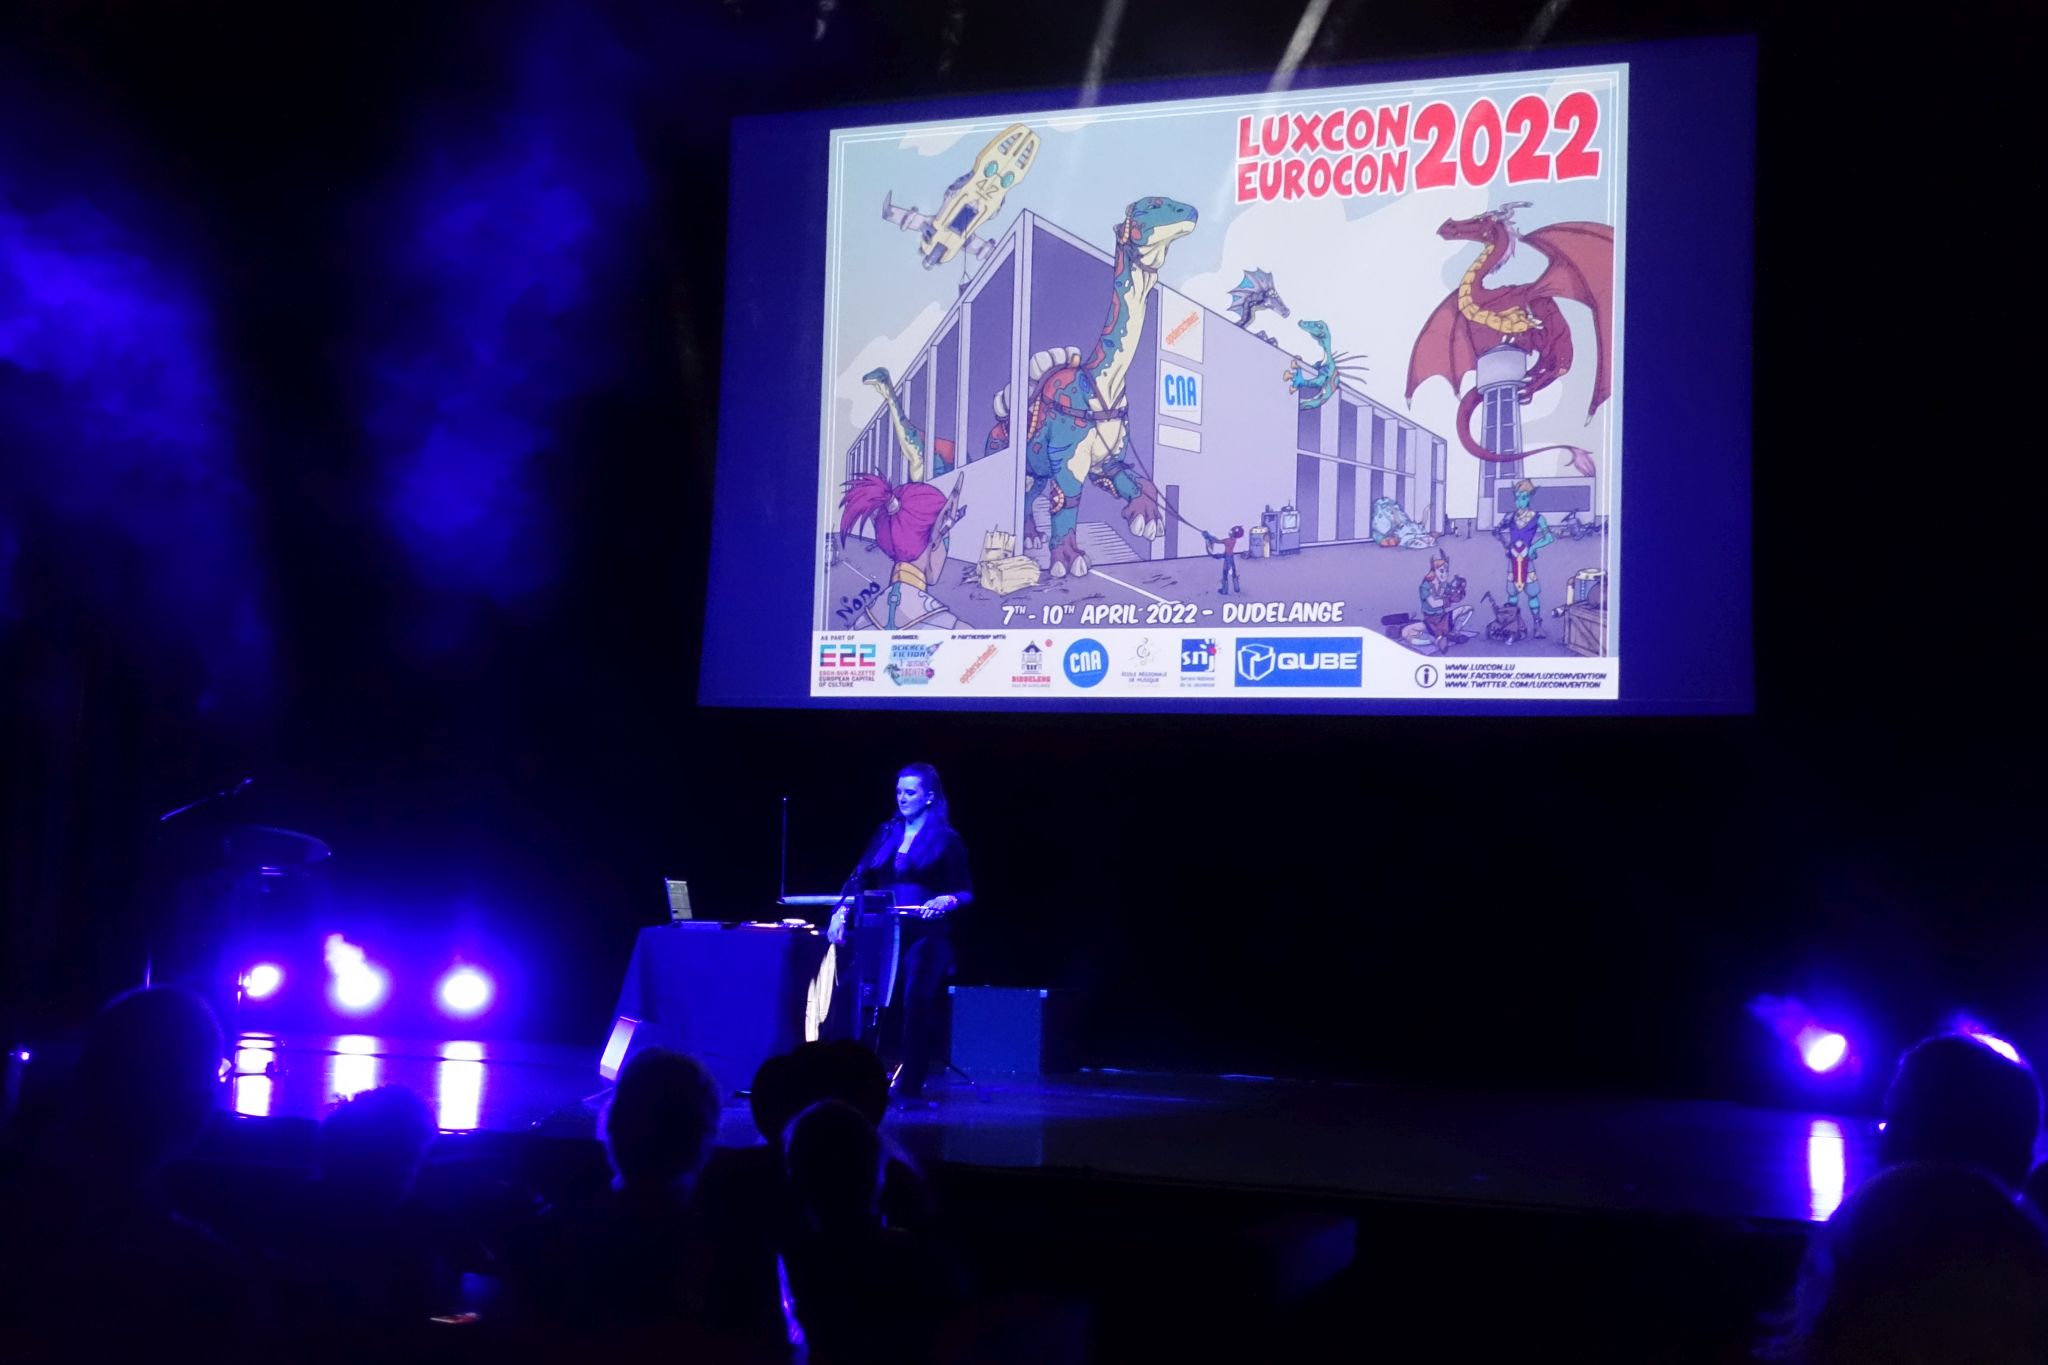 Women standing on stage in fron of the theremin. Behind her a there is a screen with convention graphic and name - Luxcon Eurocon 2022. The graphic presents dinosaurs and some fantastical creatures and vehicles around the convention venue. Whole picture has a blueish hue.